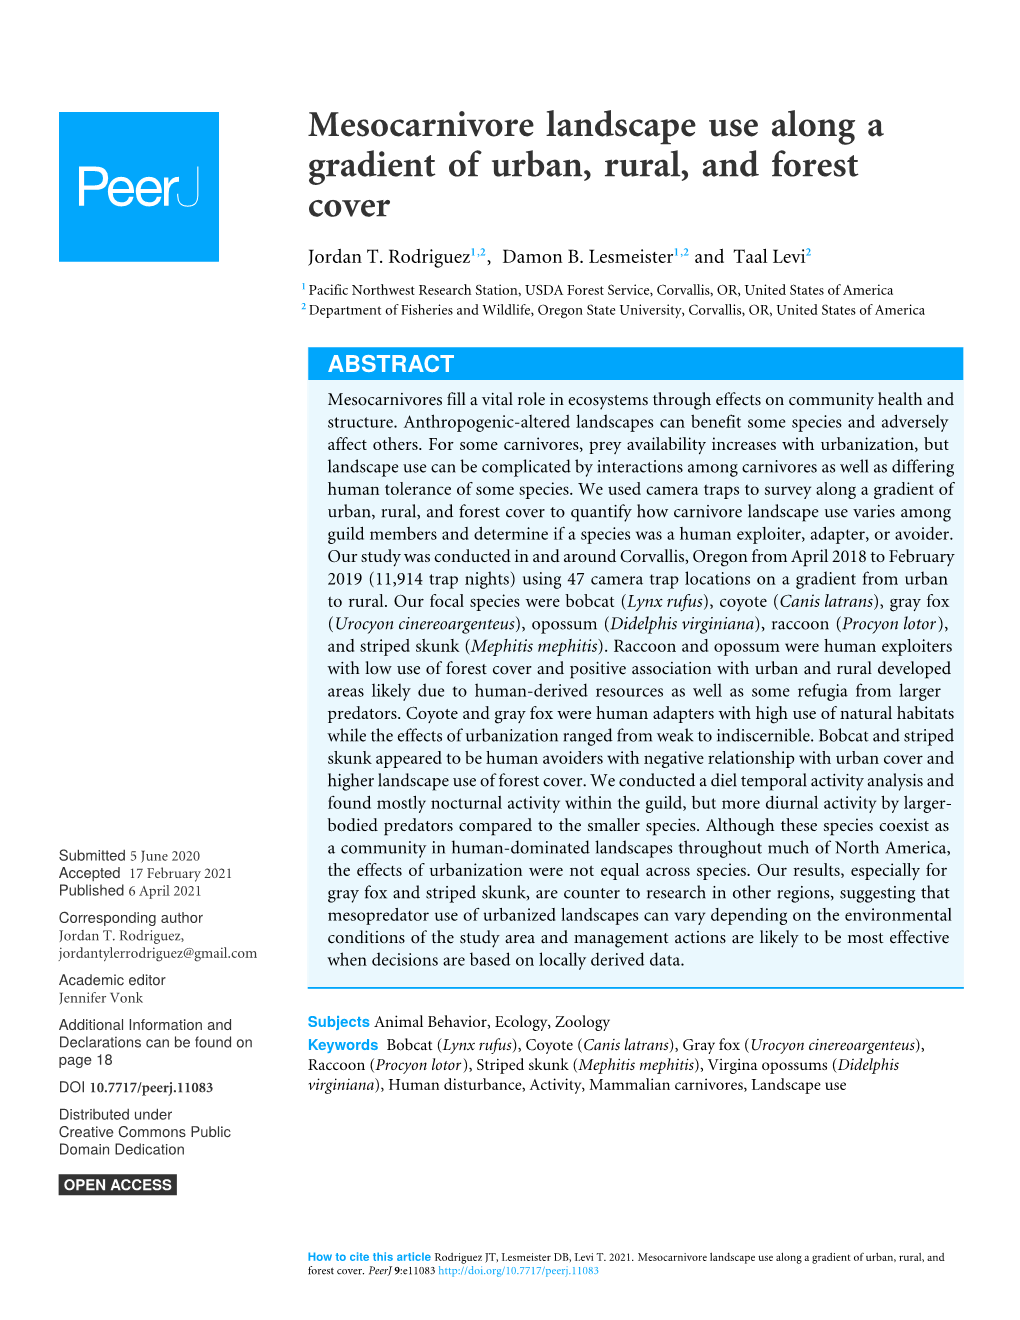 Mesocarnivore Landscape Use Along a Gradient of Urban, Rural, and Forest Cover